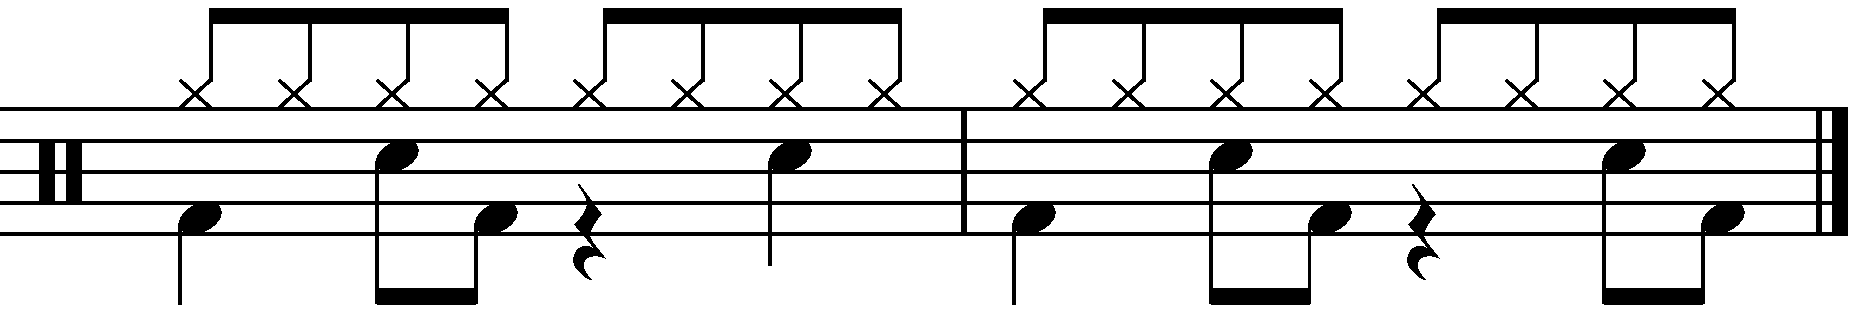 2 Bar Grooves - Example 3a